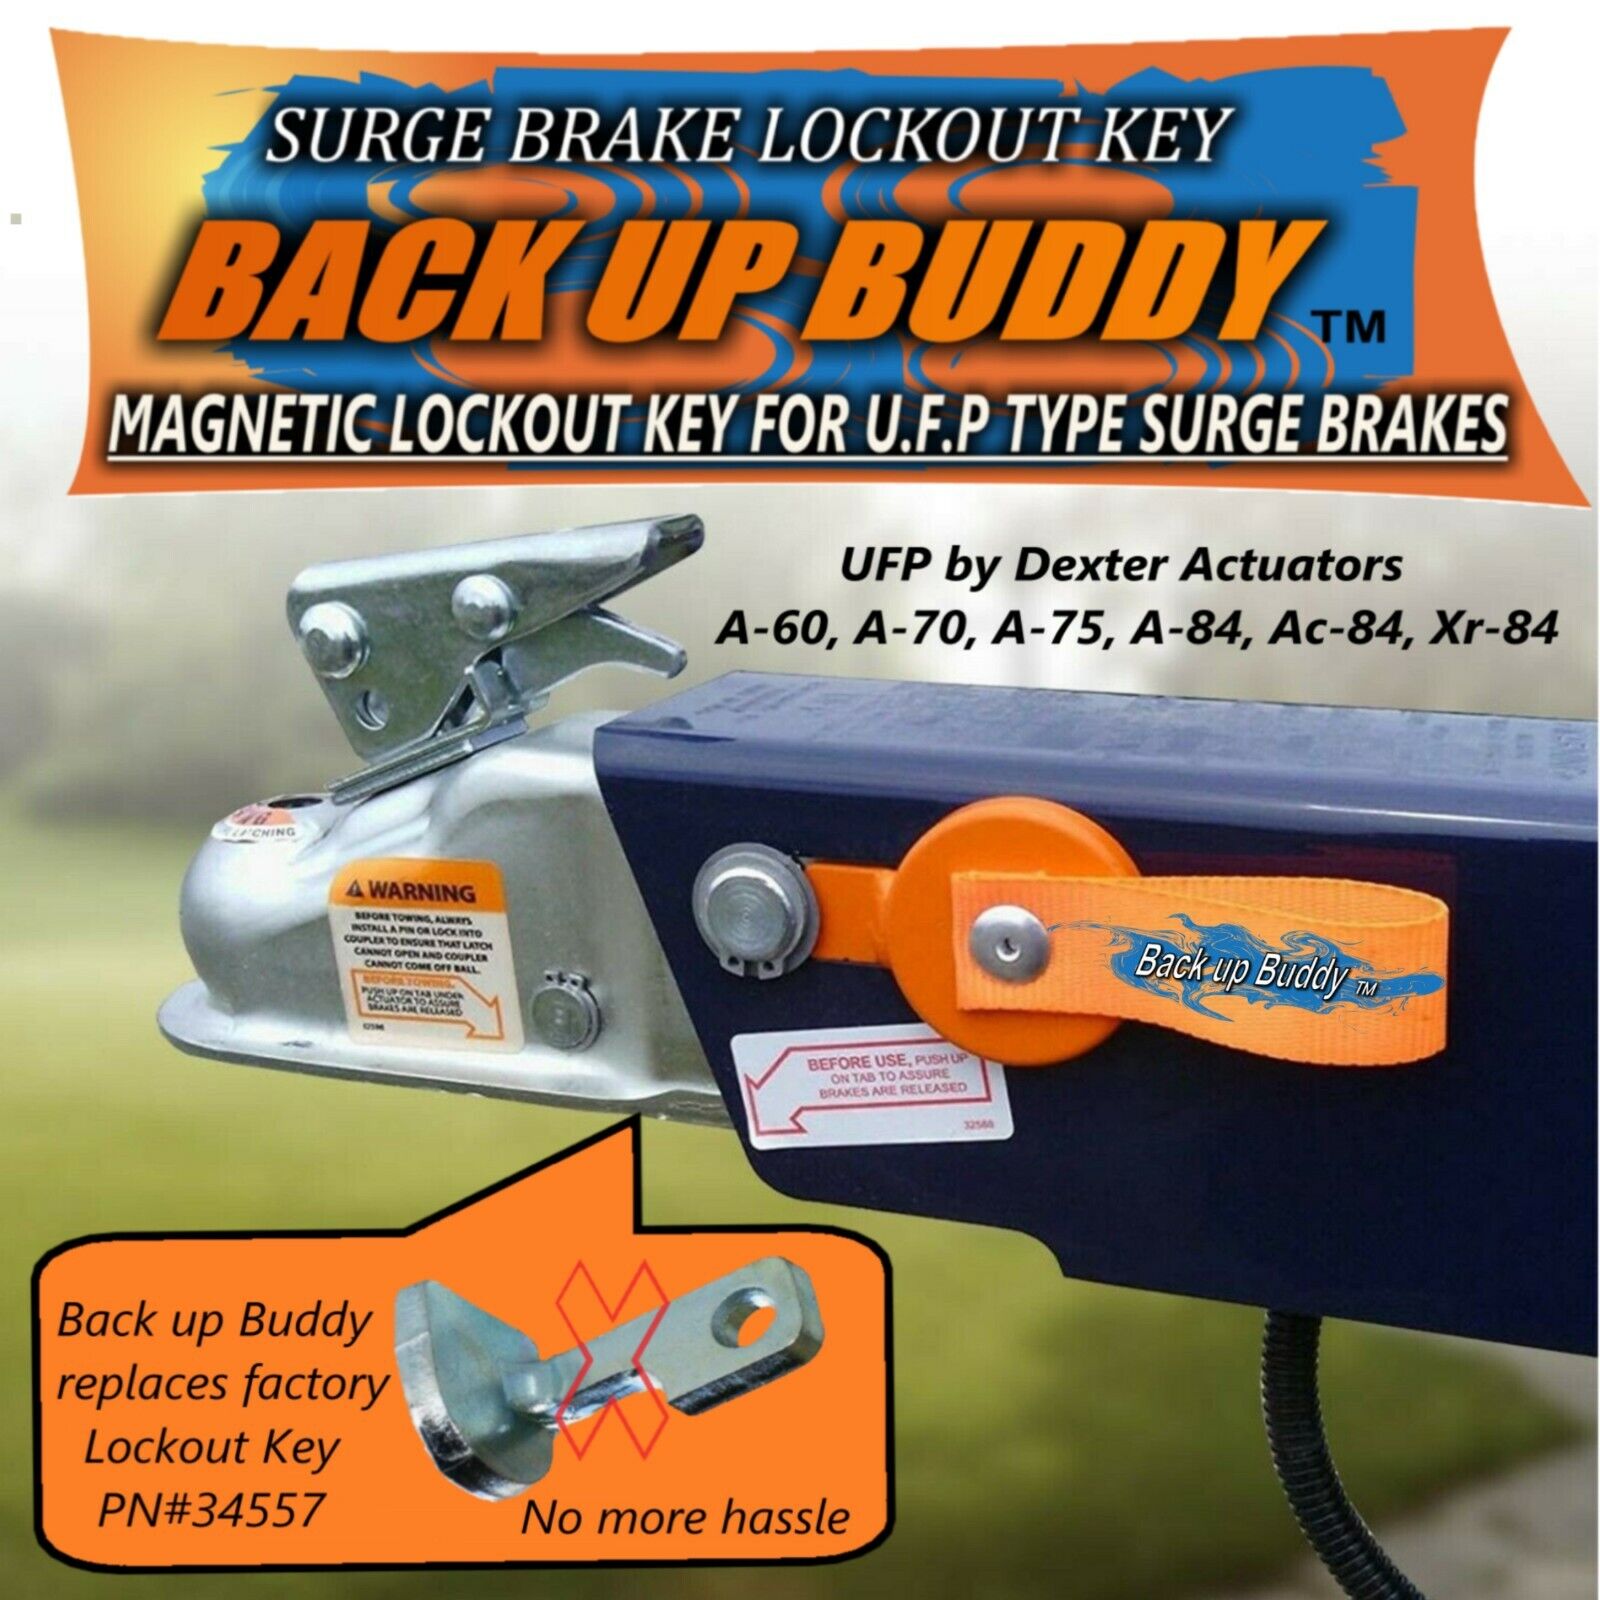  MAGNETIC LOCK OUT KEY FOR UFP TYPE TRAILER SURGE BRAKES      BACK UP BUDDY